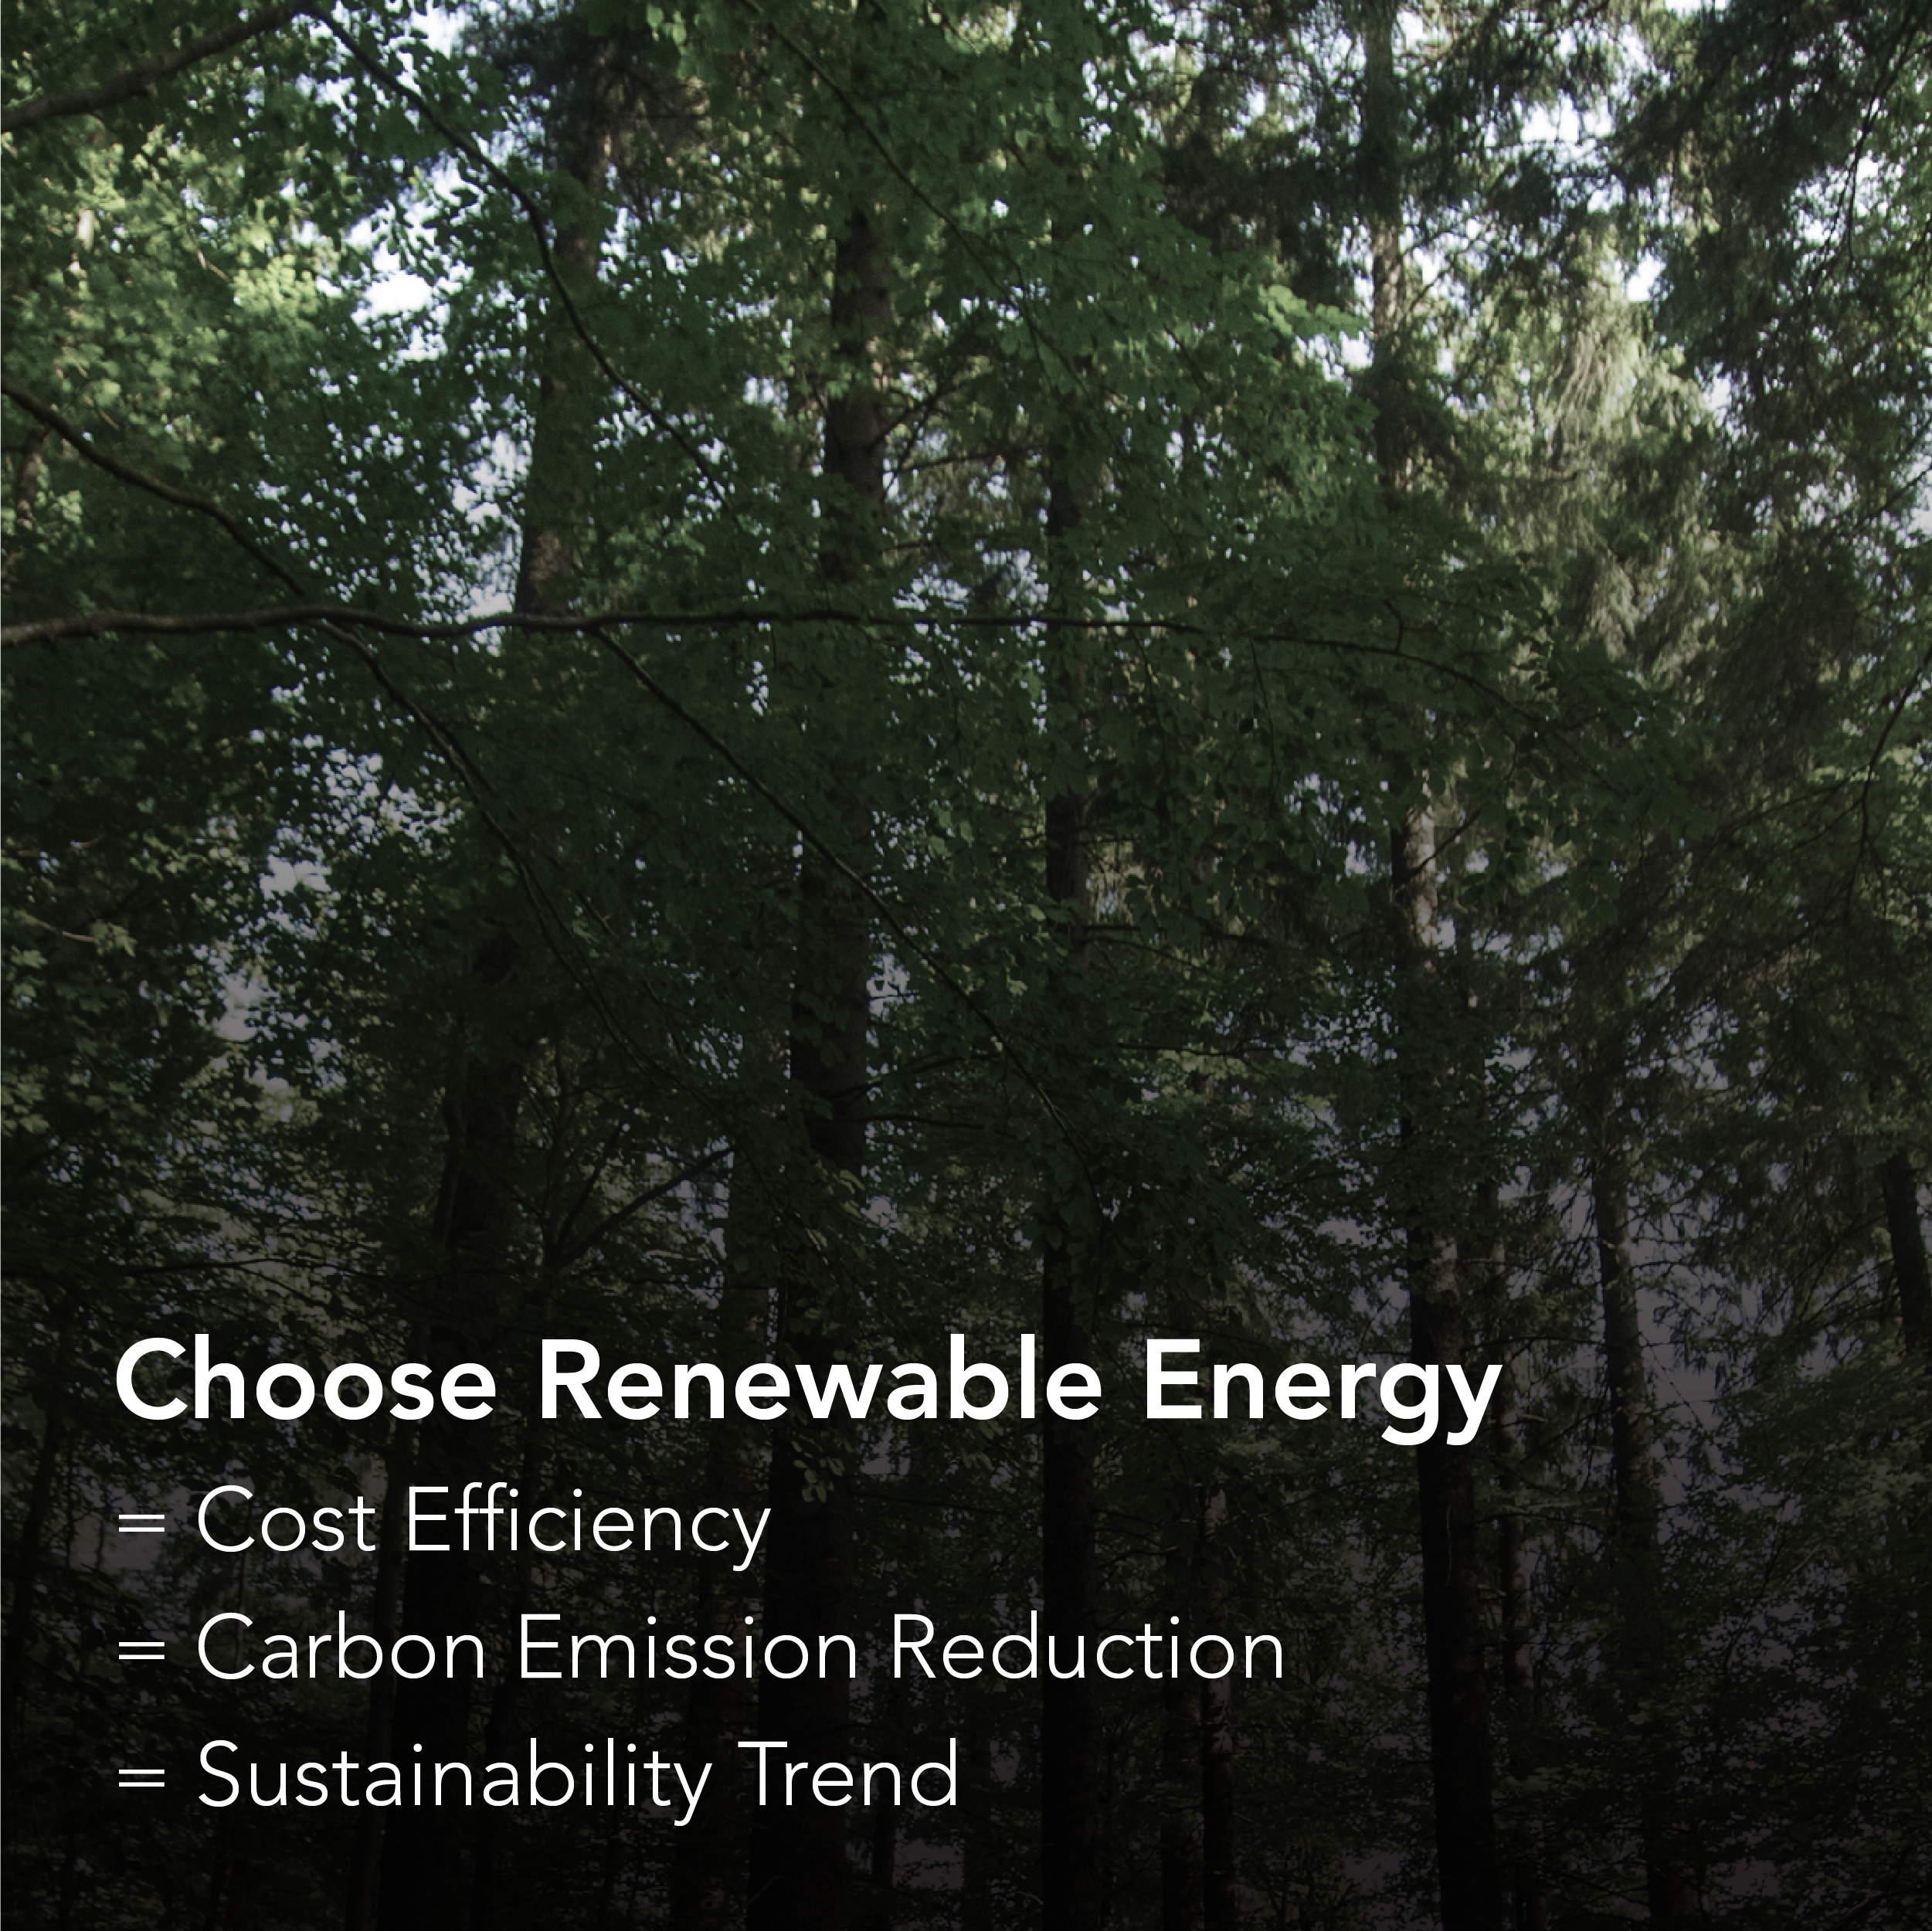 Choose Renewable Energy= Cost Efficiency, Carbon Emission Reduction & Sustainability Trend